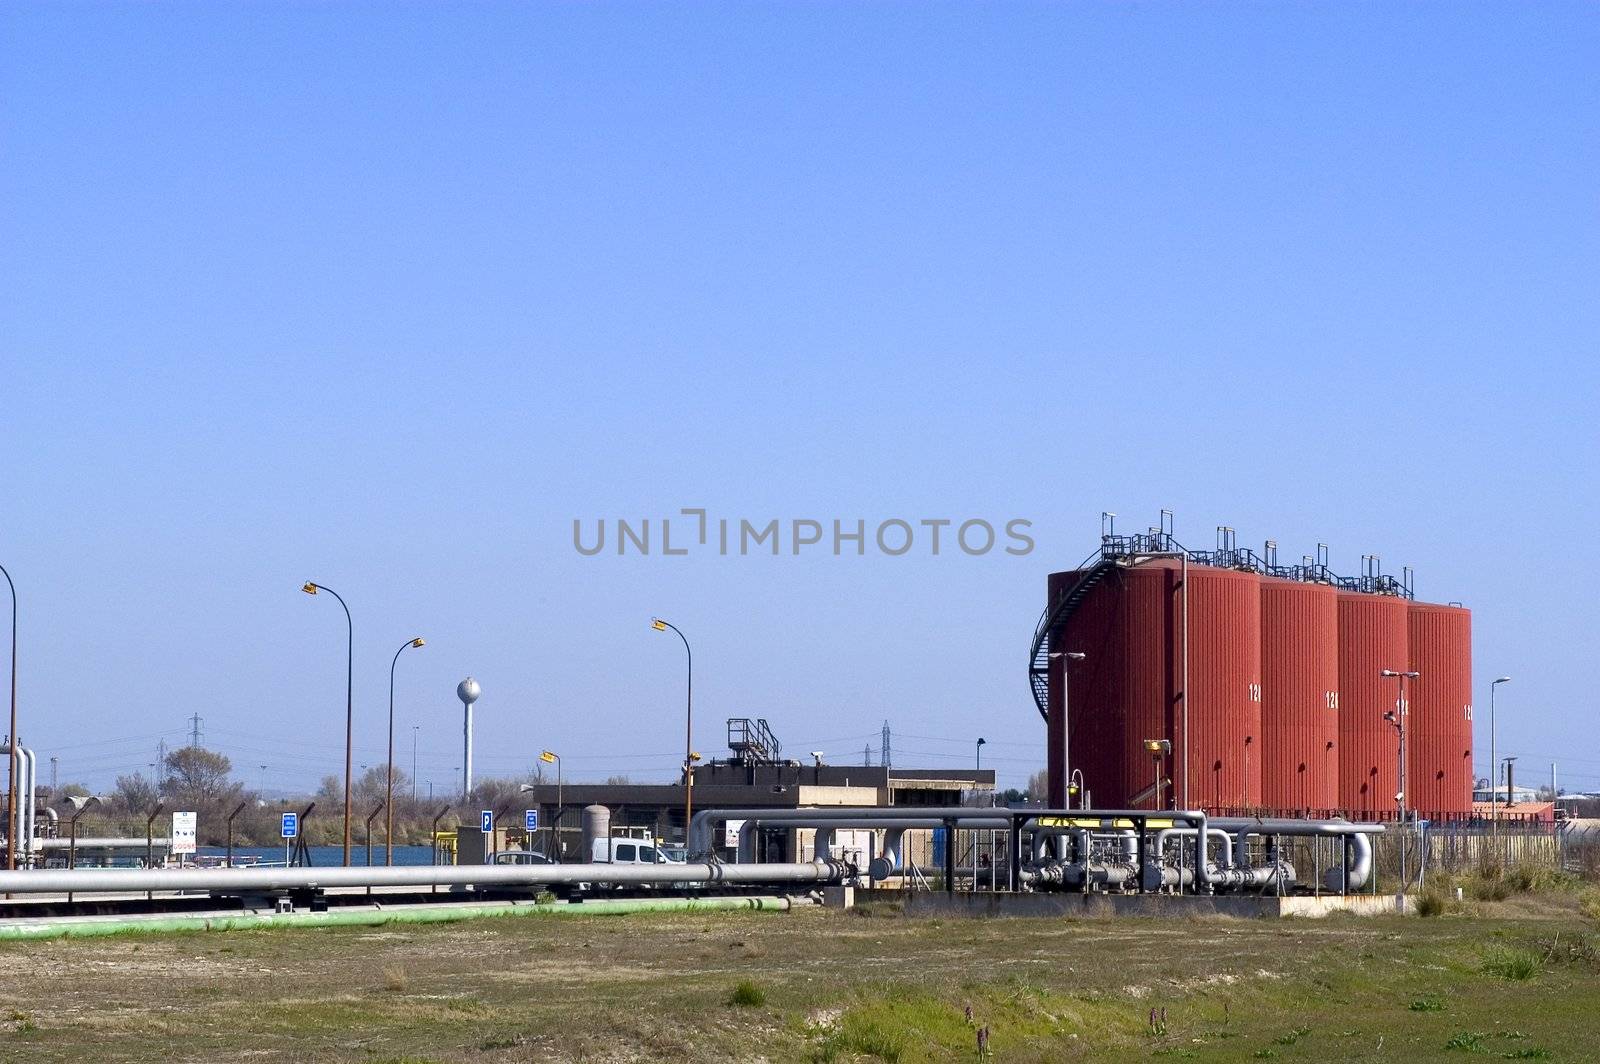 Petrochemical industry on the harbor industrial park of Fos on sea.